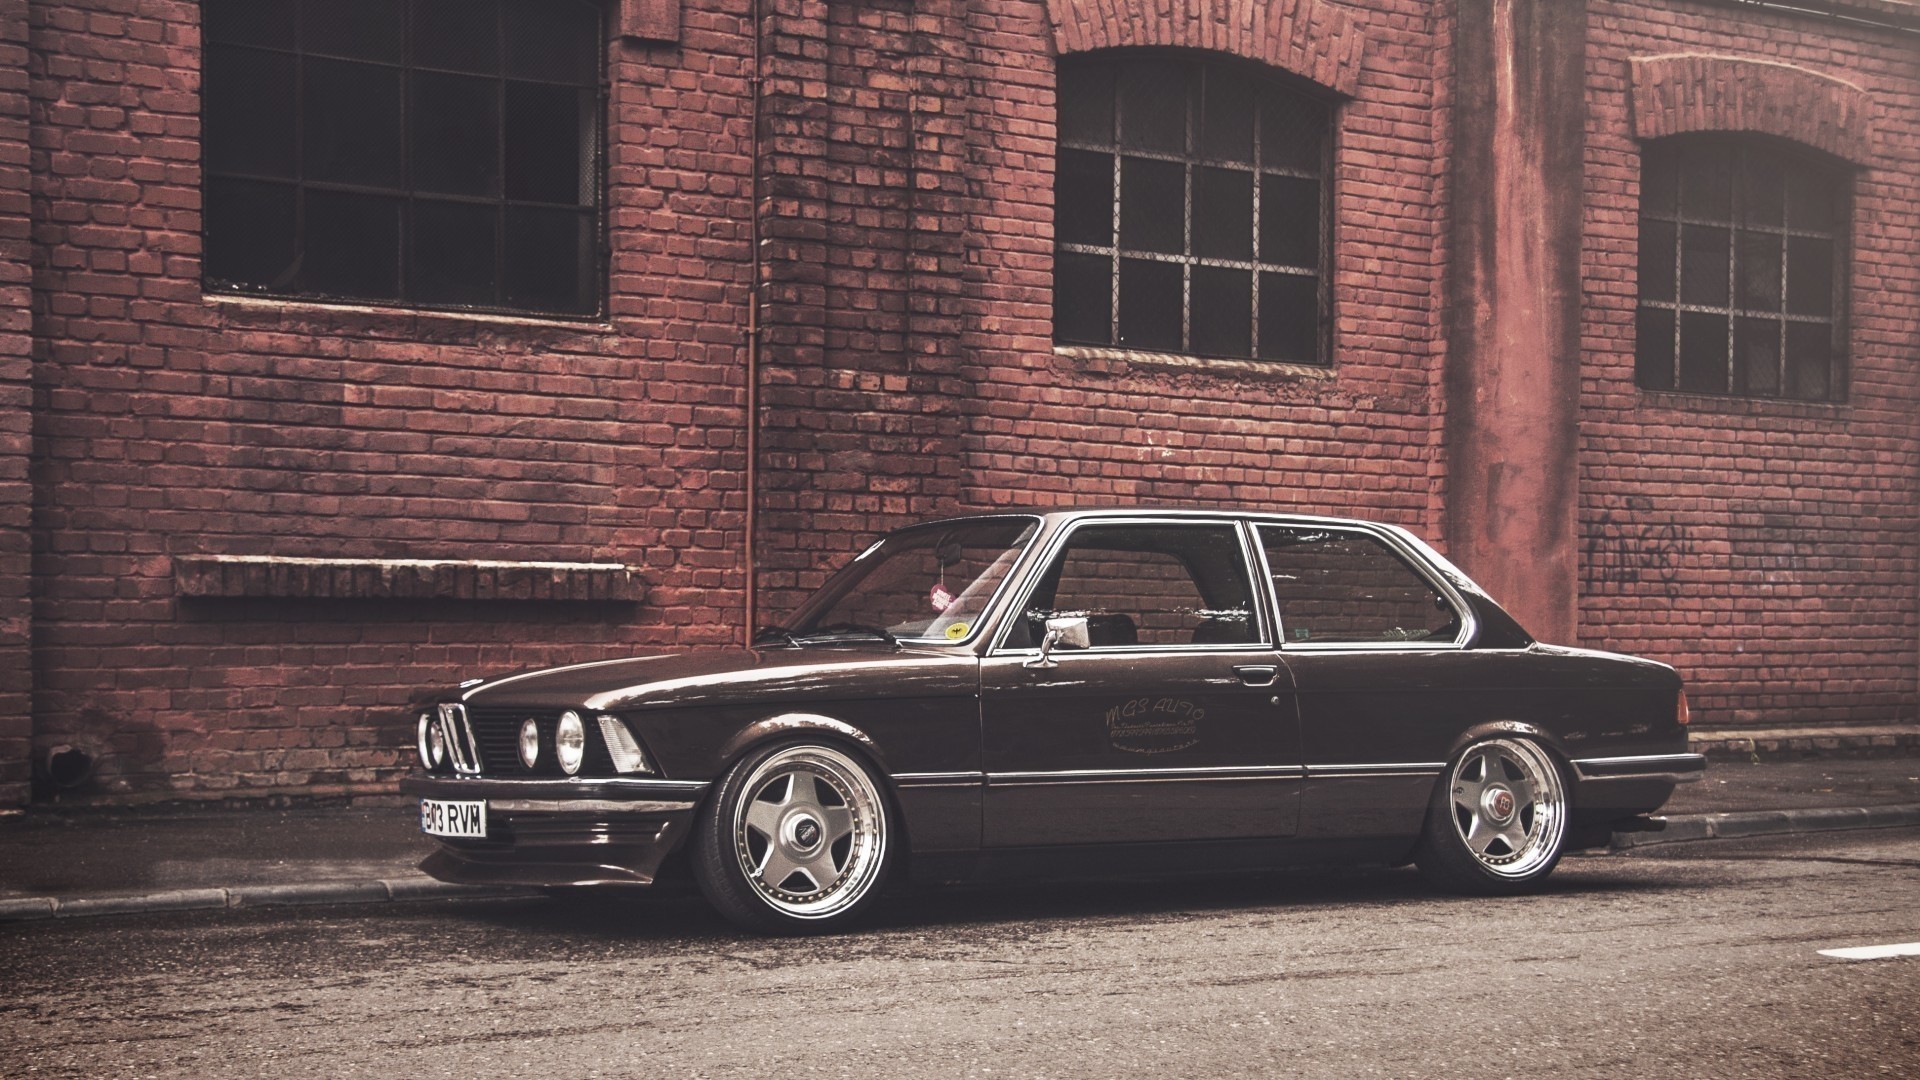 Bmw E21 Old Car Photoshoot Wallpaper New HD